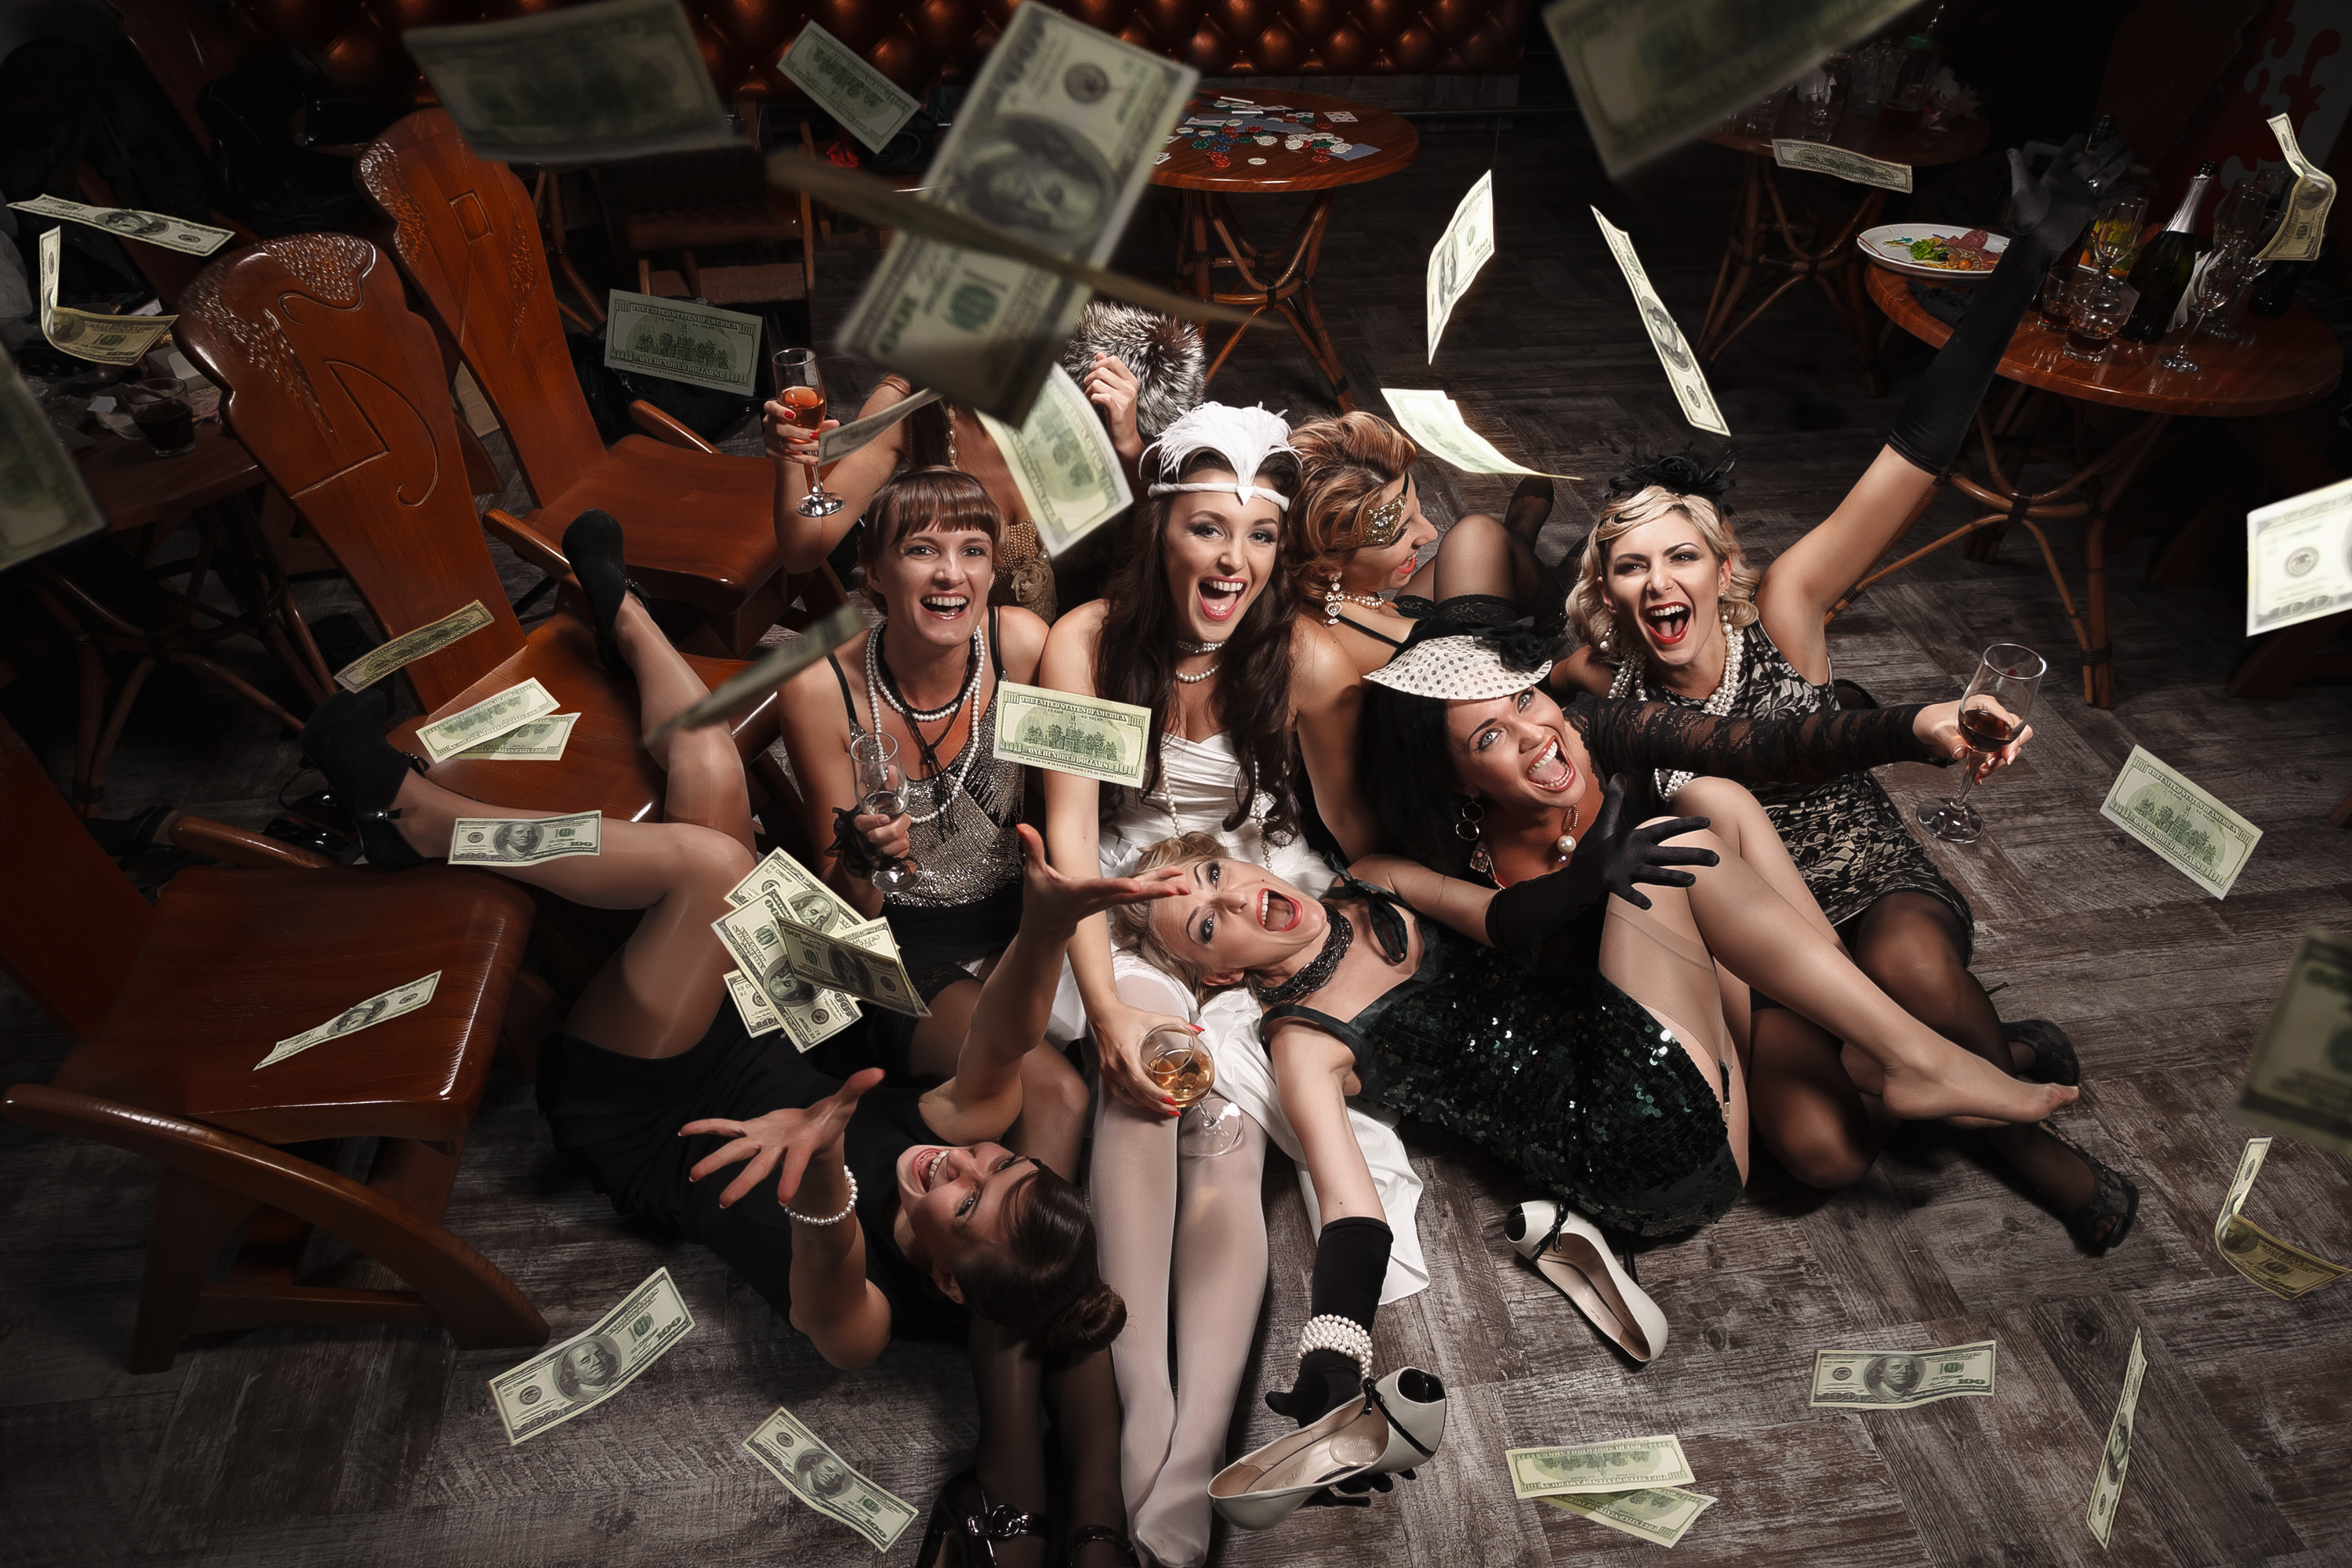 Women through money in the air at a bachelorette party